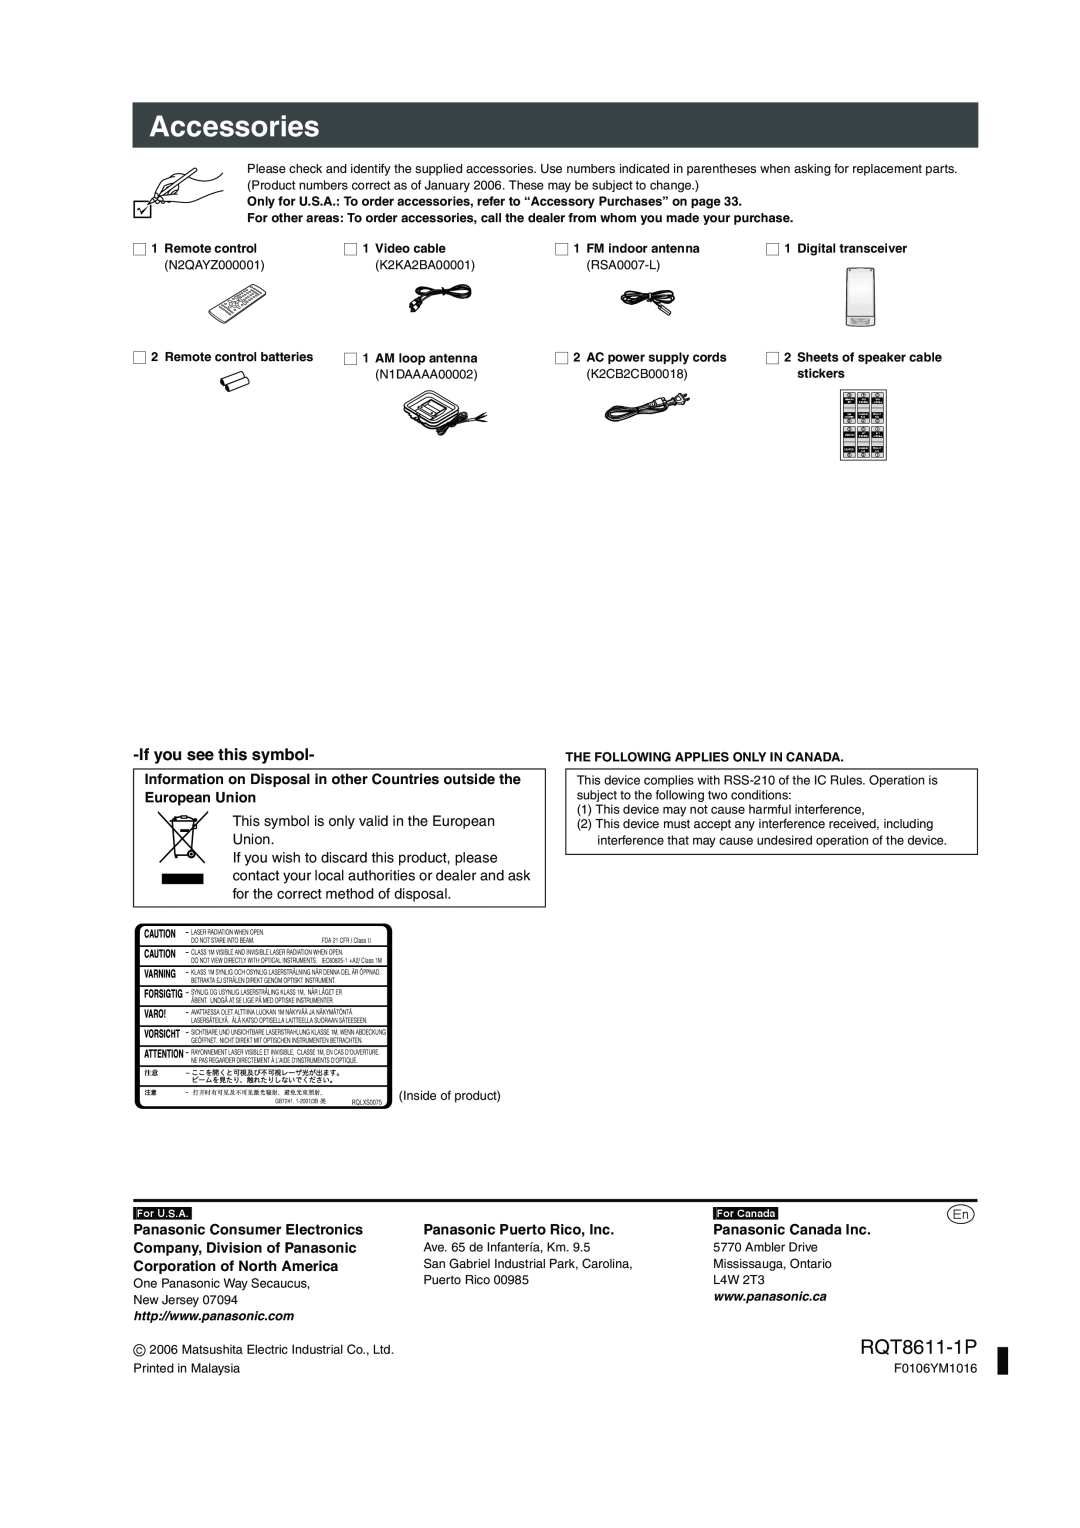 Panasonic SC-HT640W manual Accessories, Ifyou see this symbol, HT640W.bookPage36Friday,January20,20065 50PM, N2QAYZ000001 